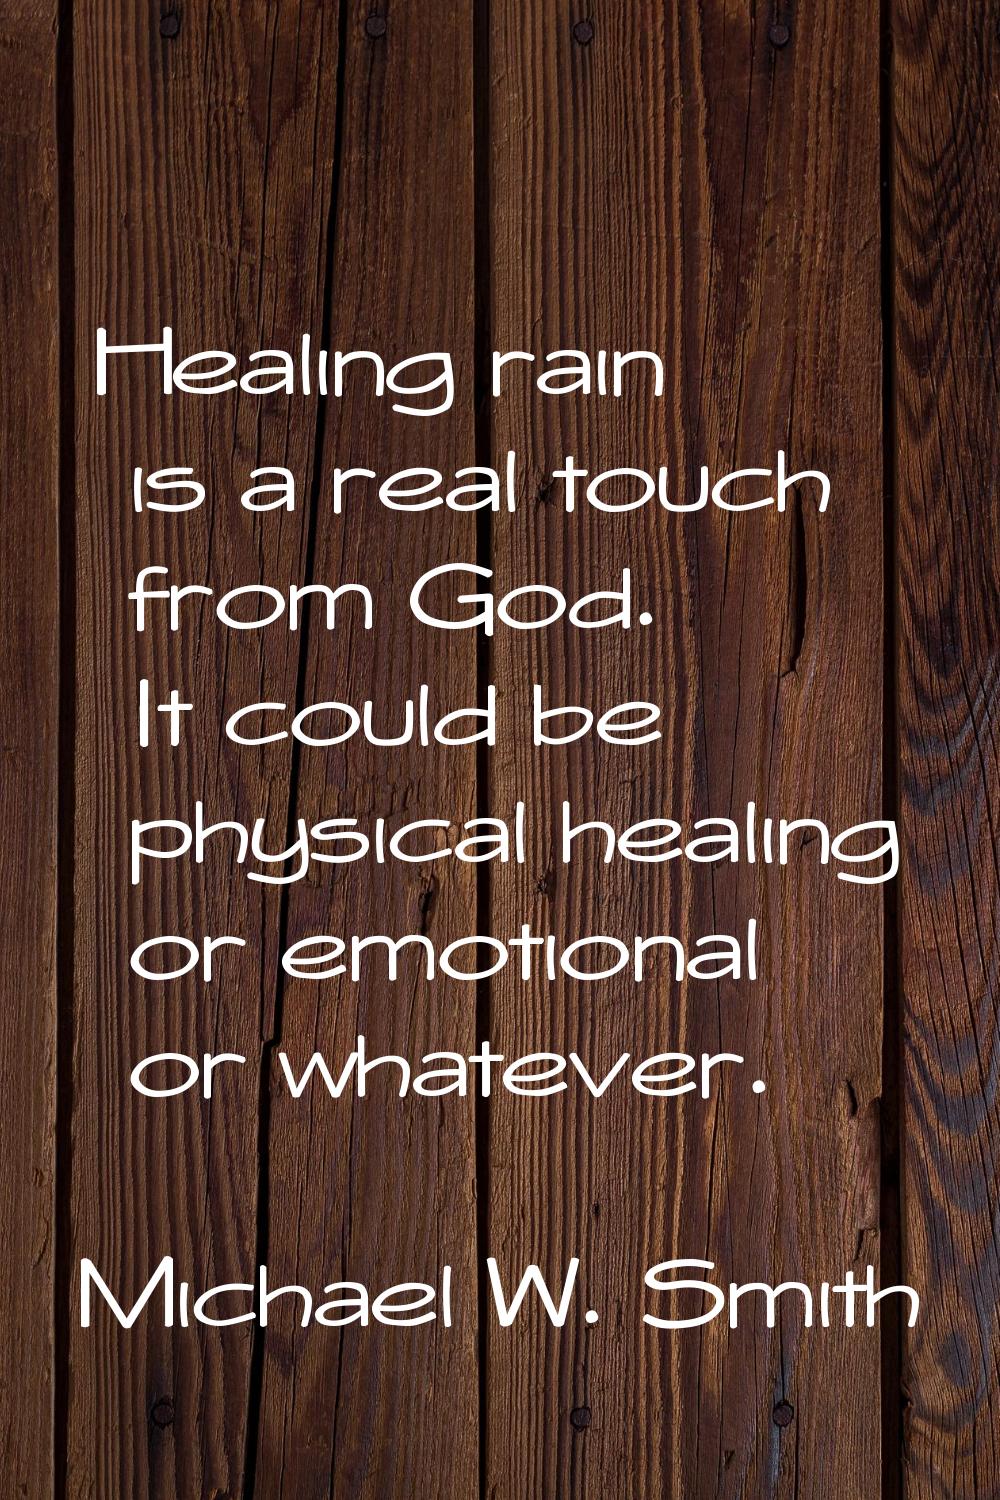 Healing rain is a real touch from God. It could be physical healing or emotional or whatever.